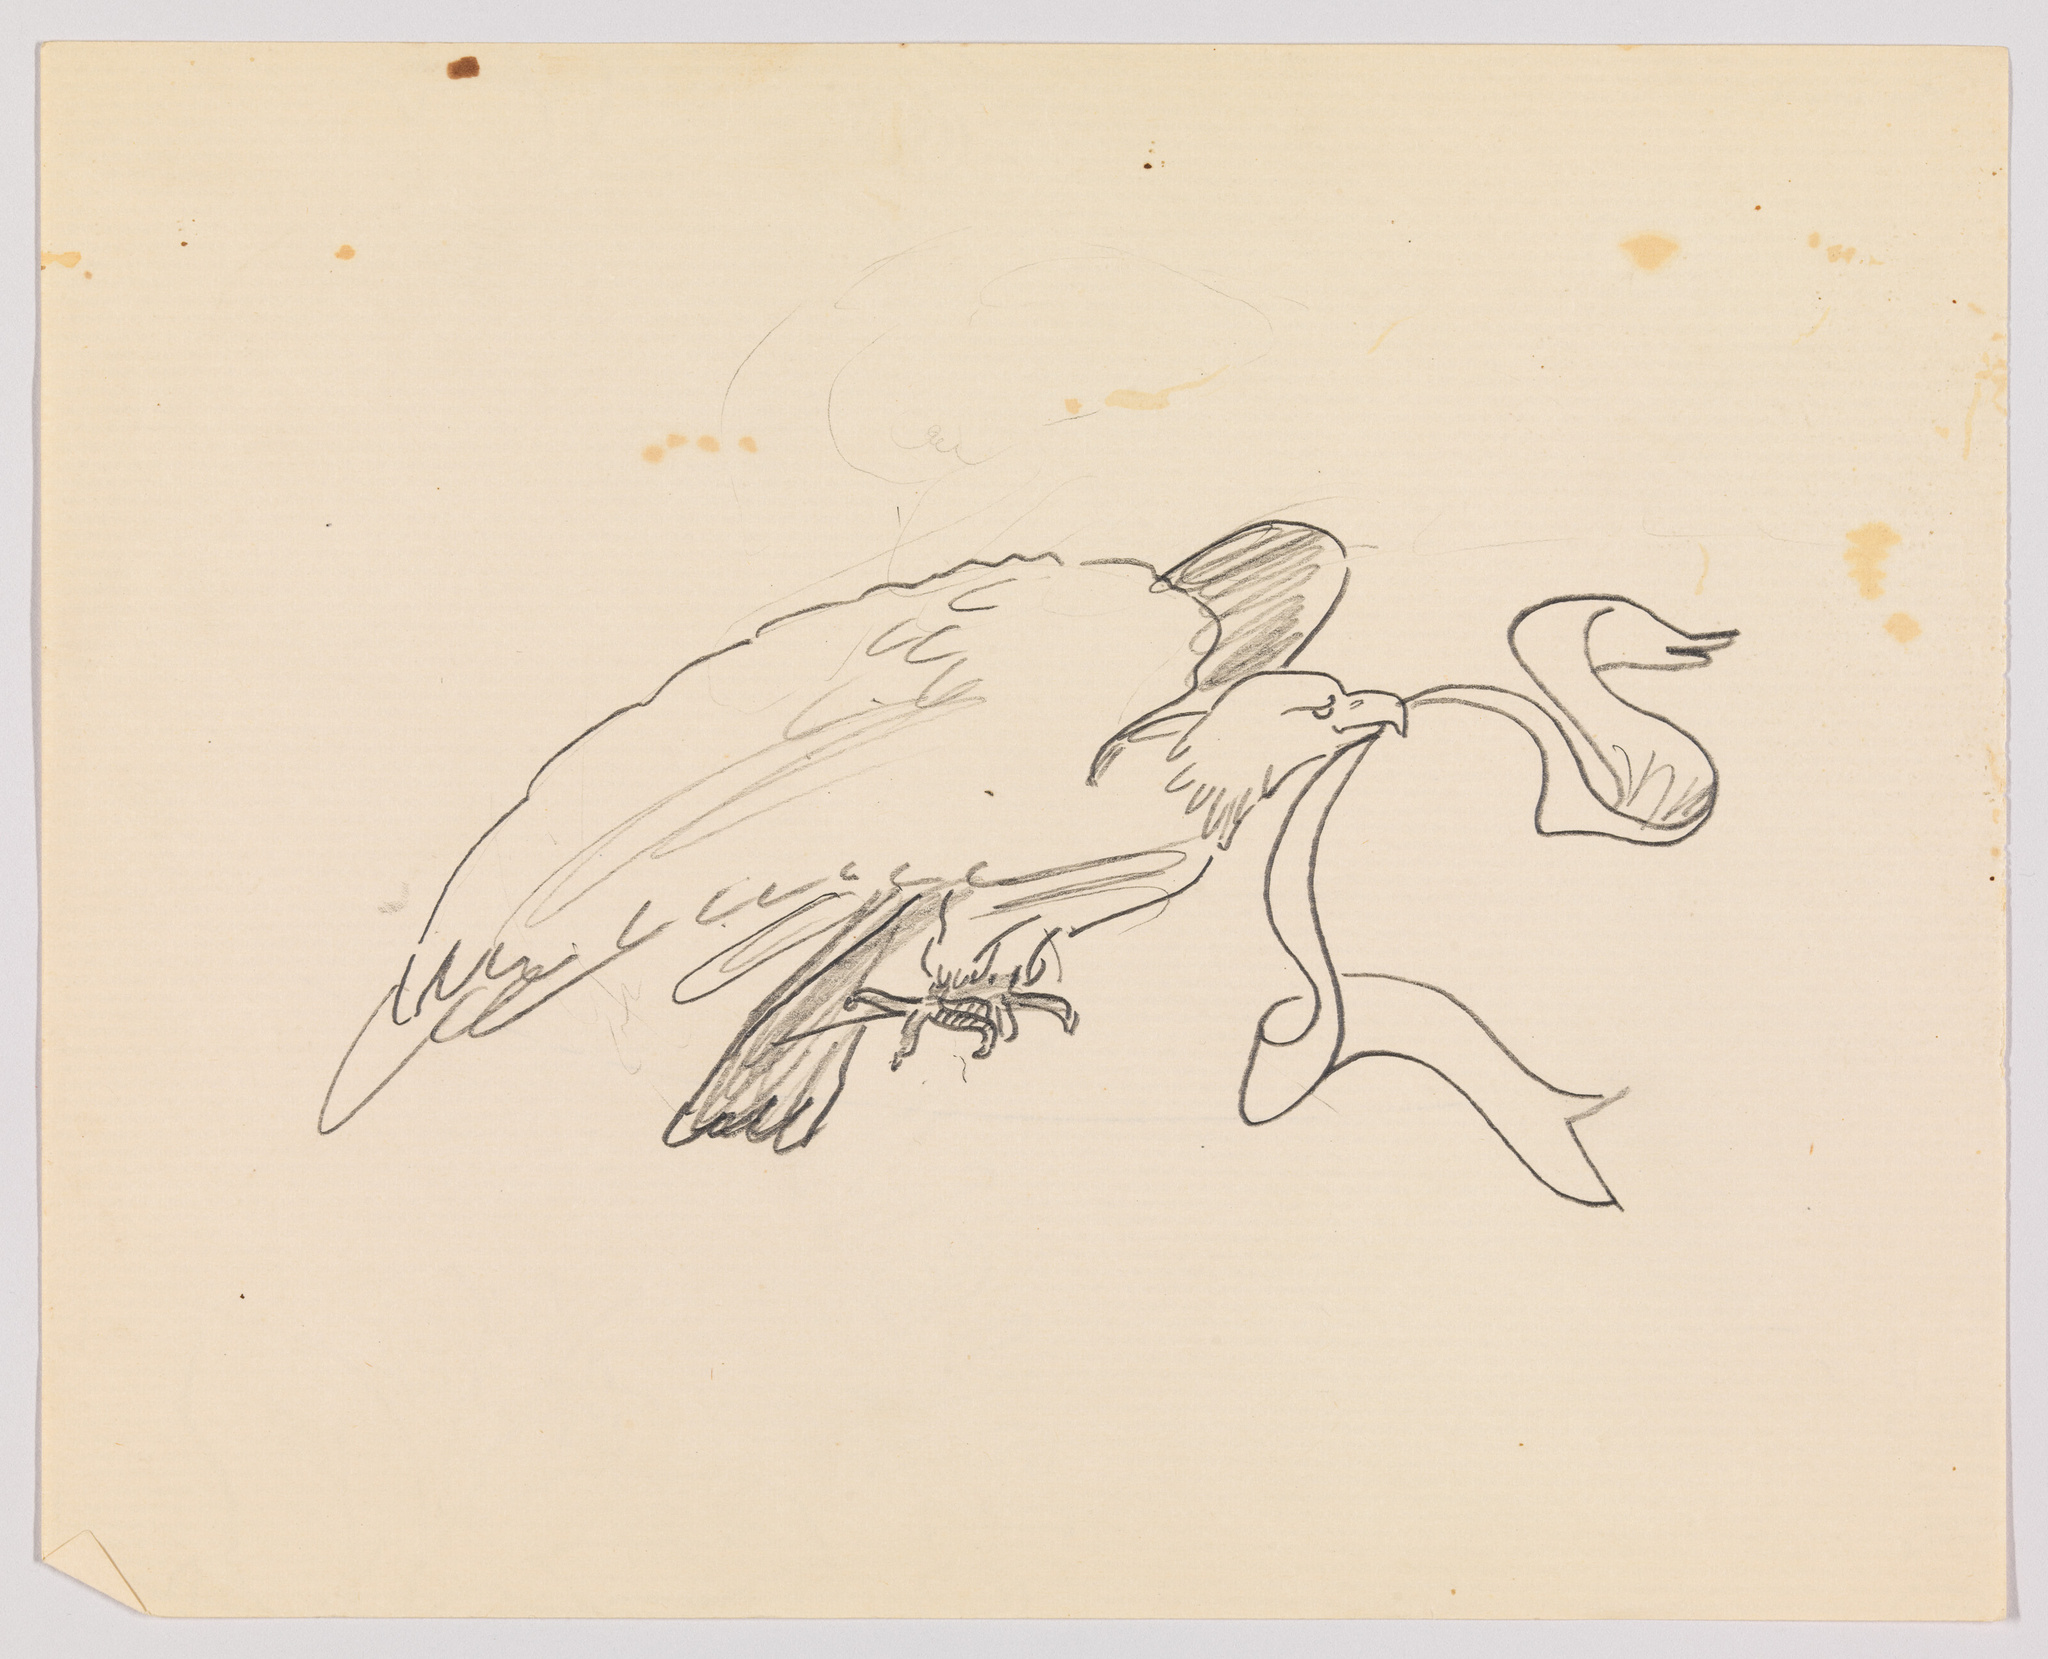 Edward Hopper | (Study of an Eagle with Garland) | Whitney Museum of ...